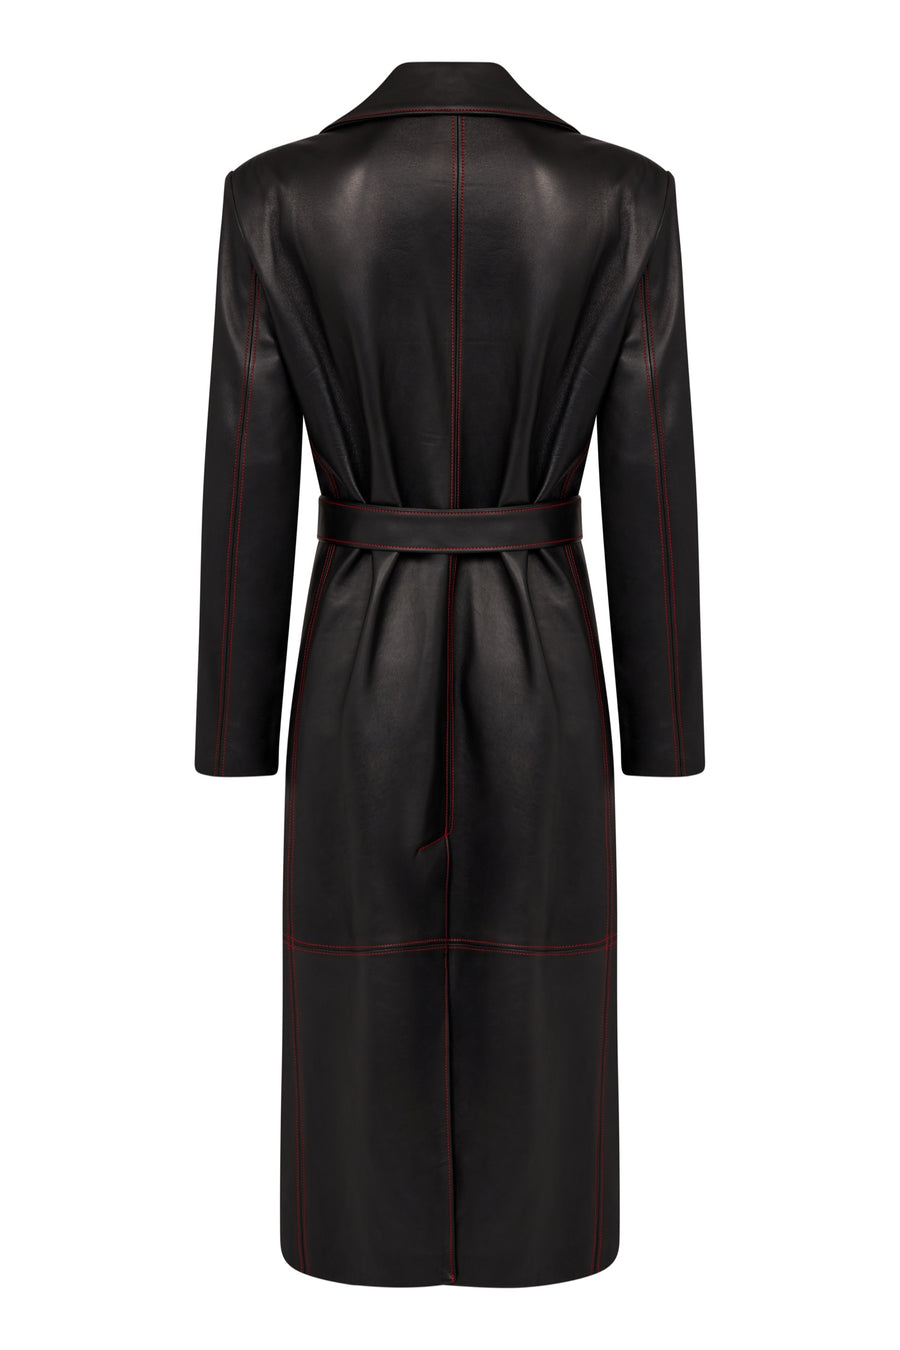 Luxury Long Black Leather Trench Coat With Red Stitching Details 